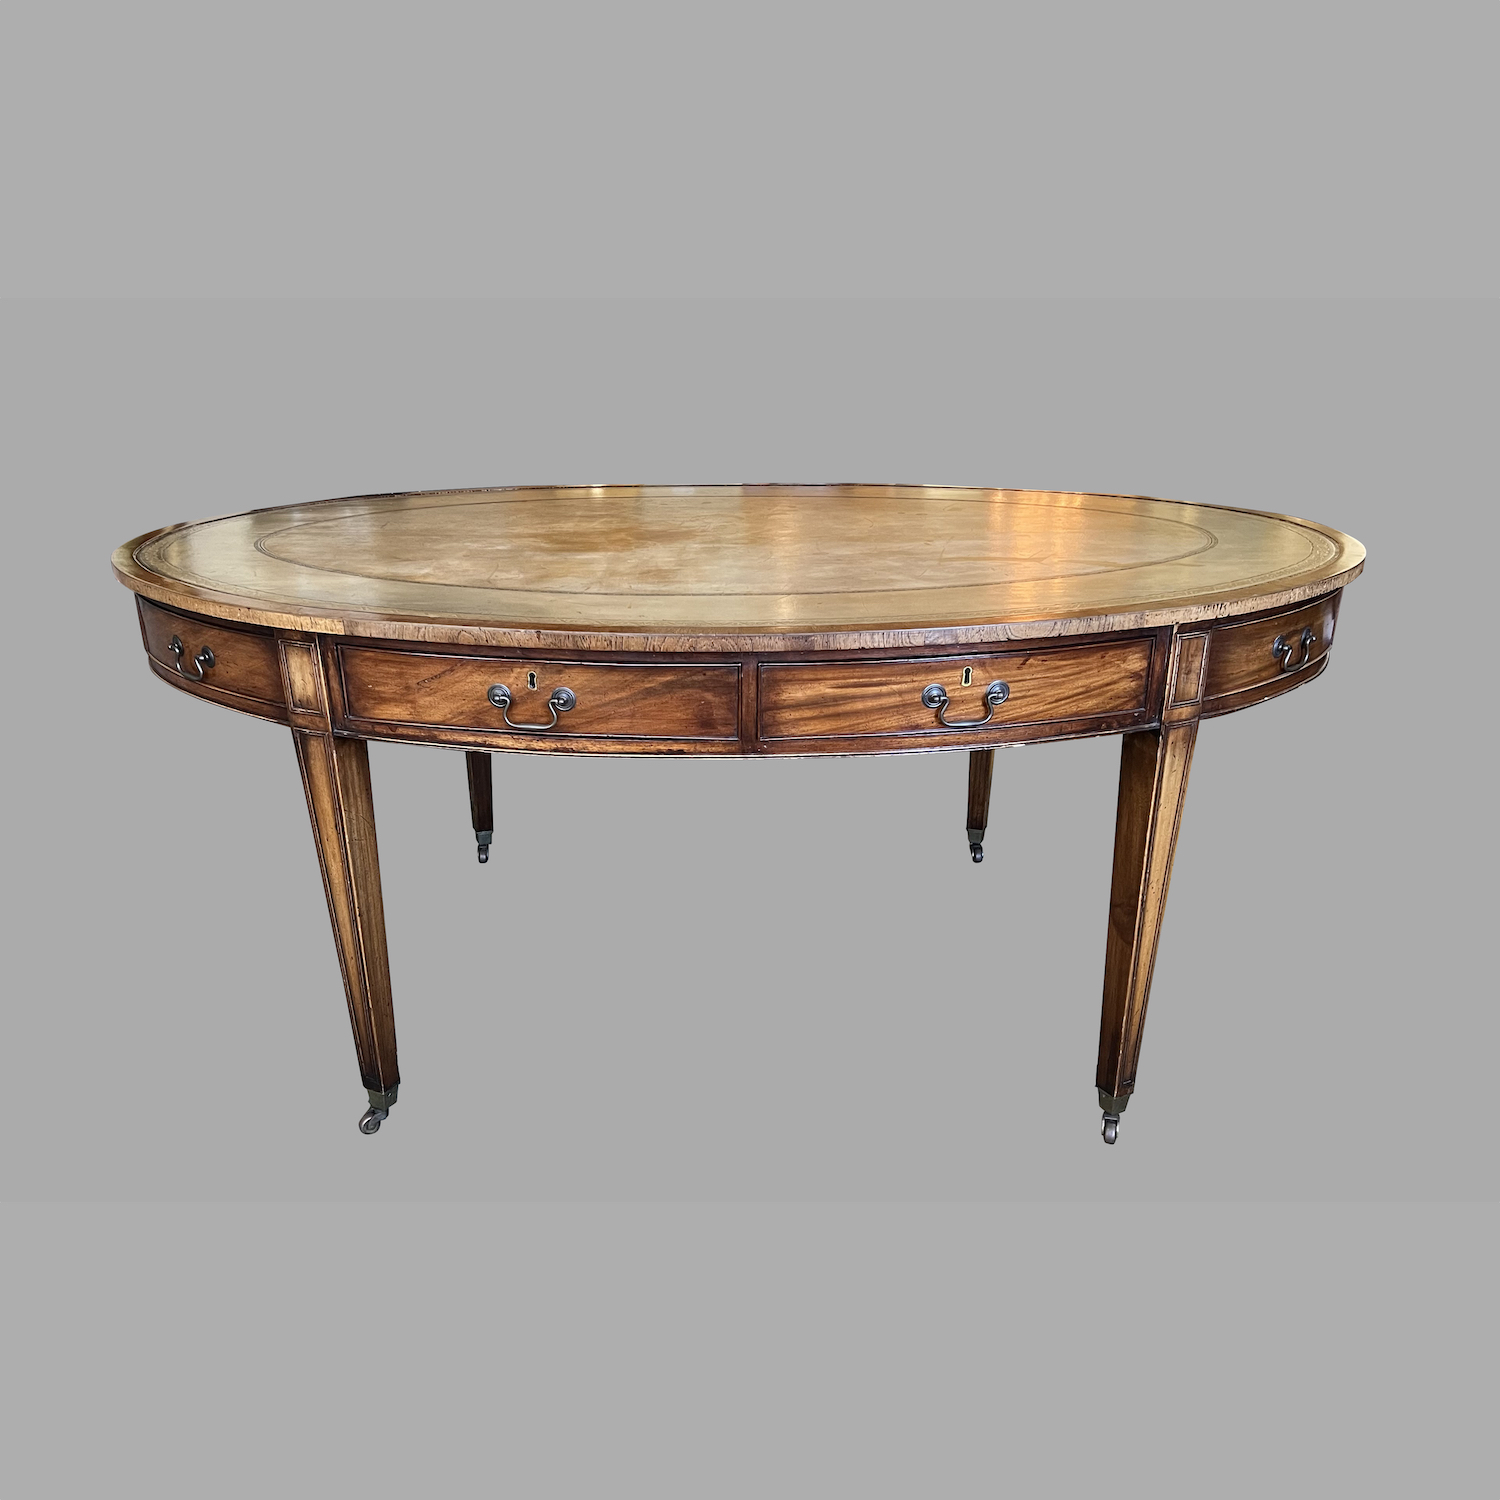 english-hepplewhite-style-mahogany-oval-writing-table-with-leather-top-c723-1